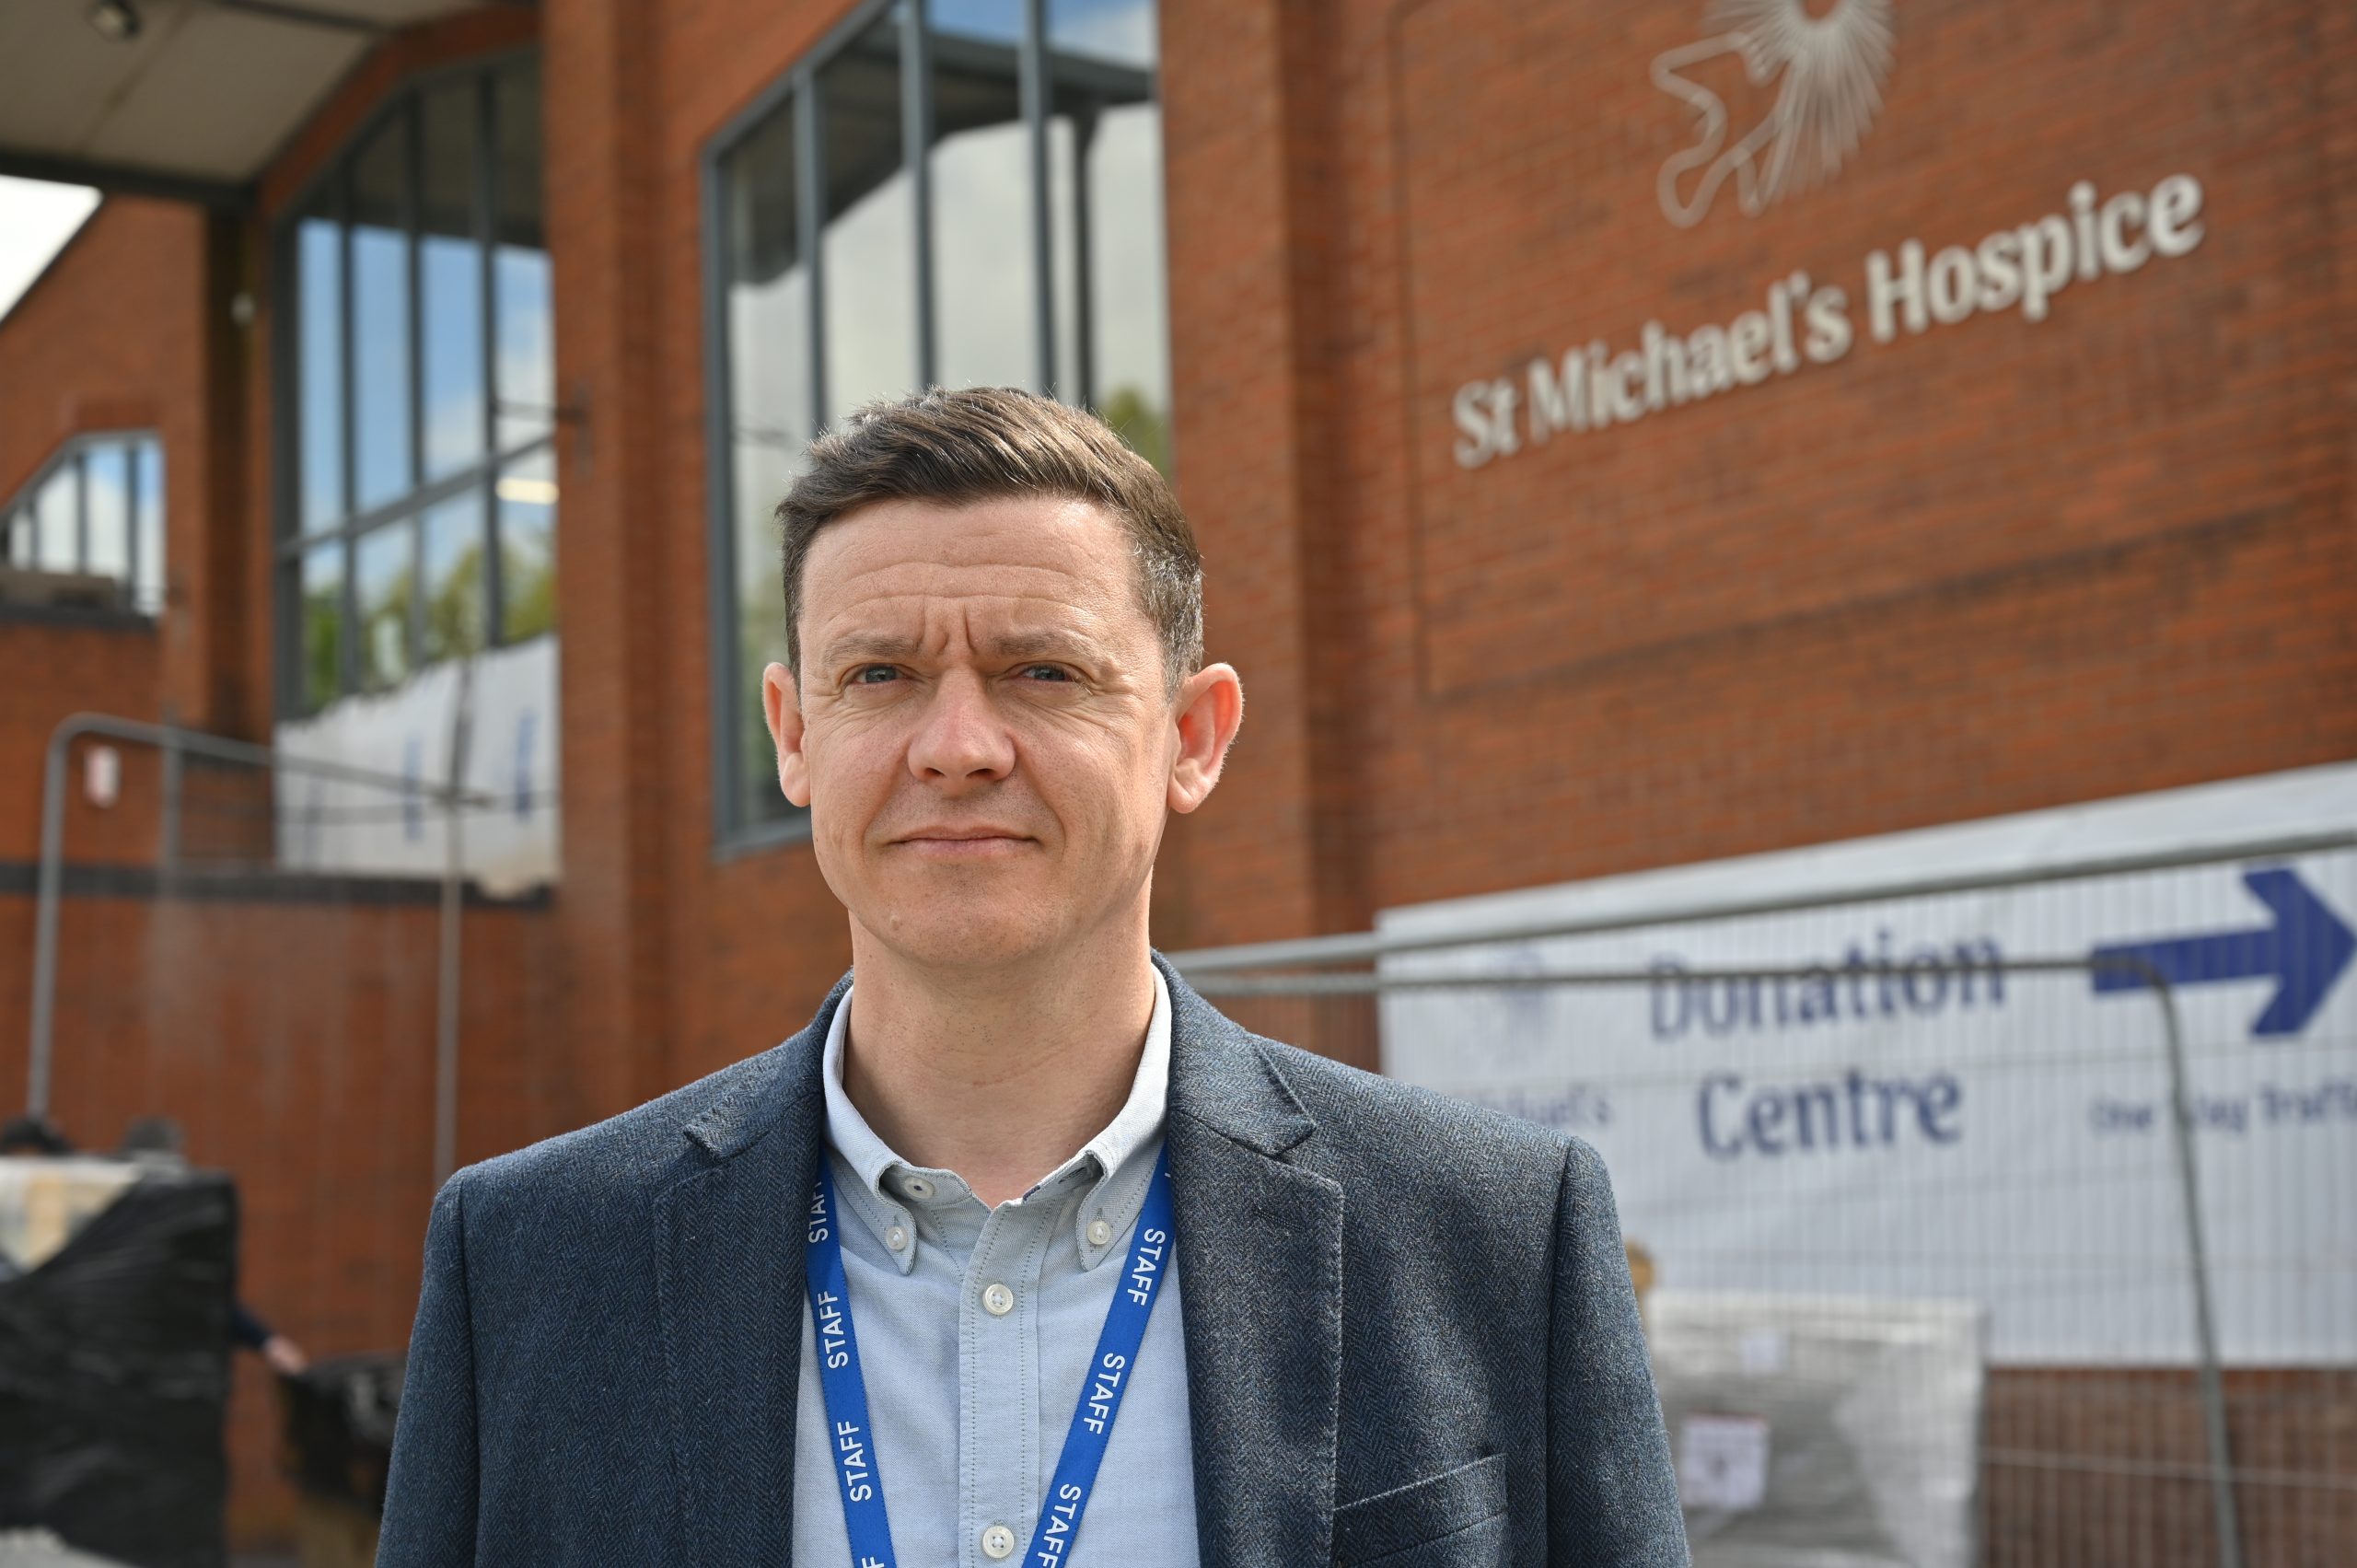 CHARITY | St Michael’s Hospice to launch ‘biggest charity shop in the Midlands’ near Hereford to provide vital income stream